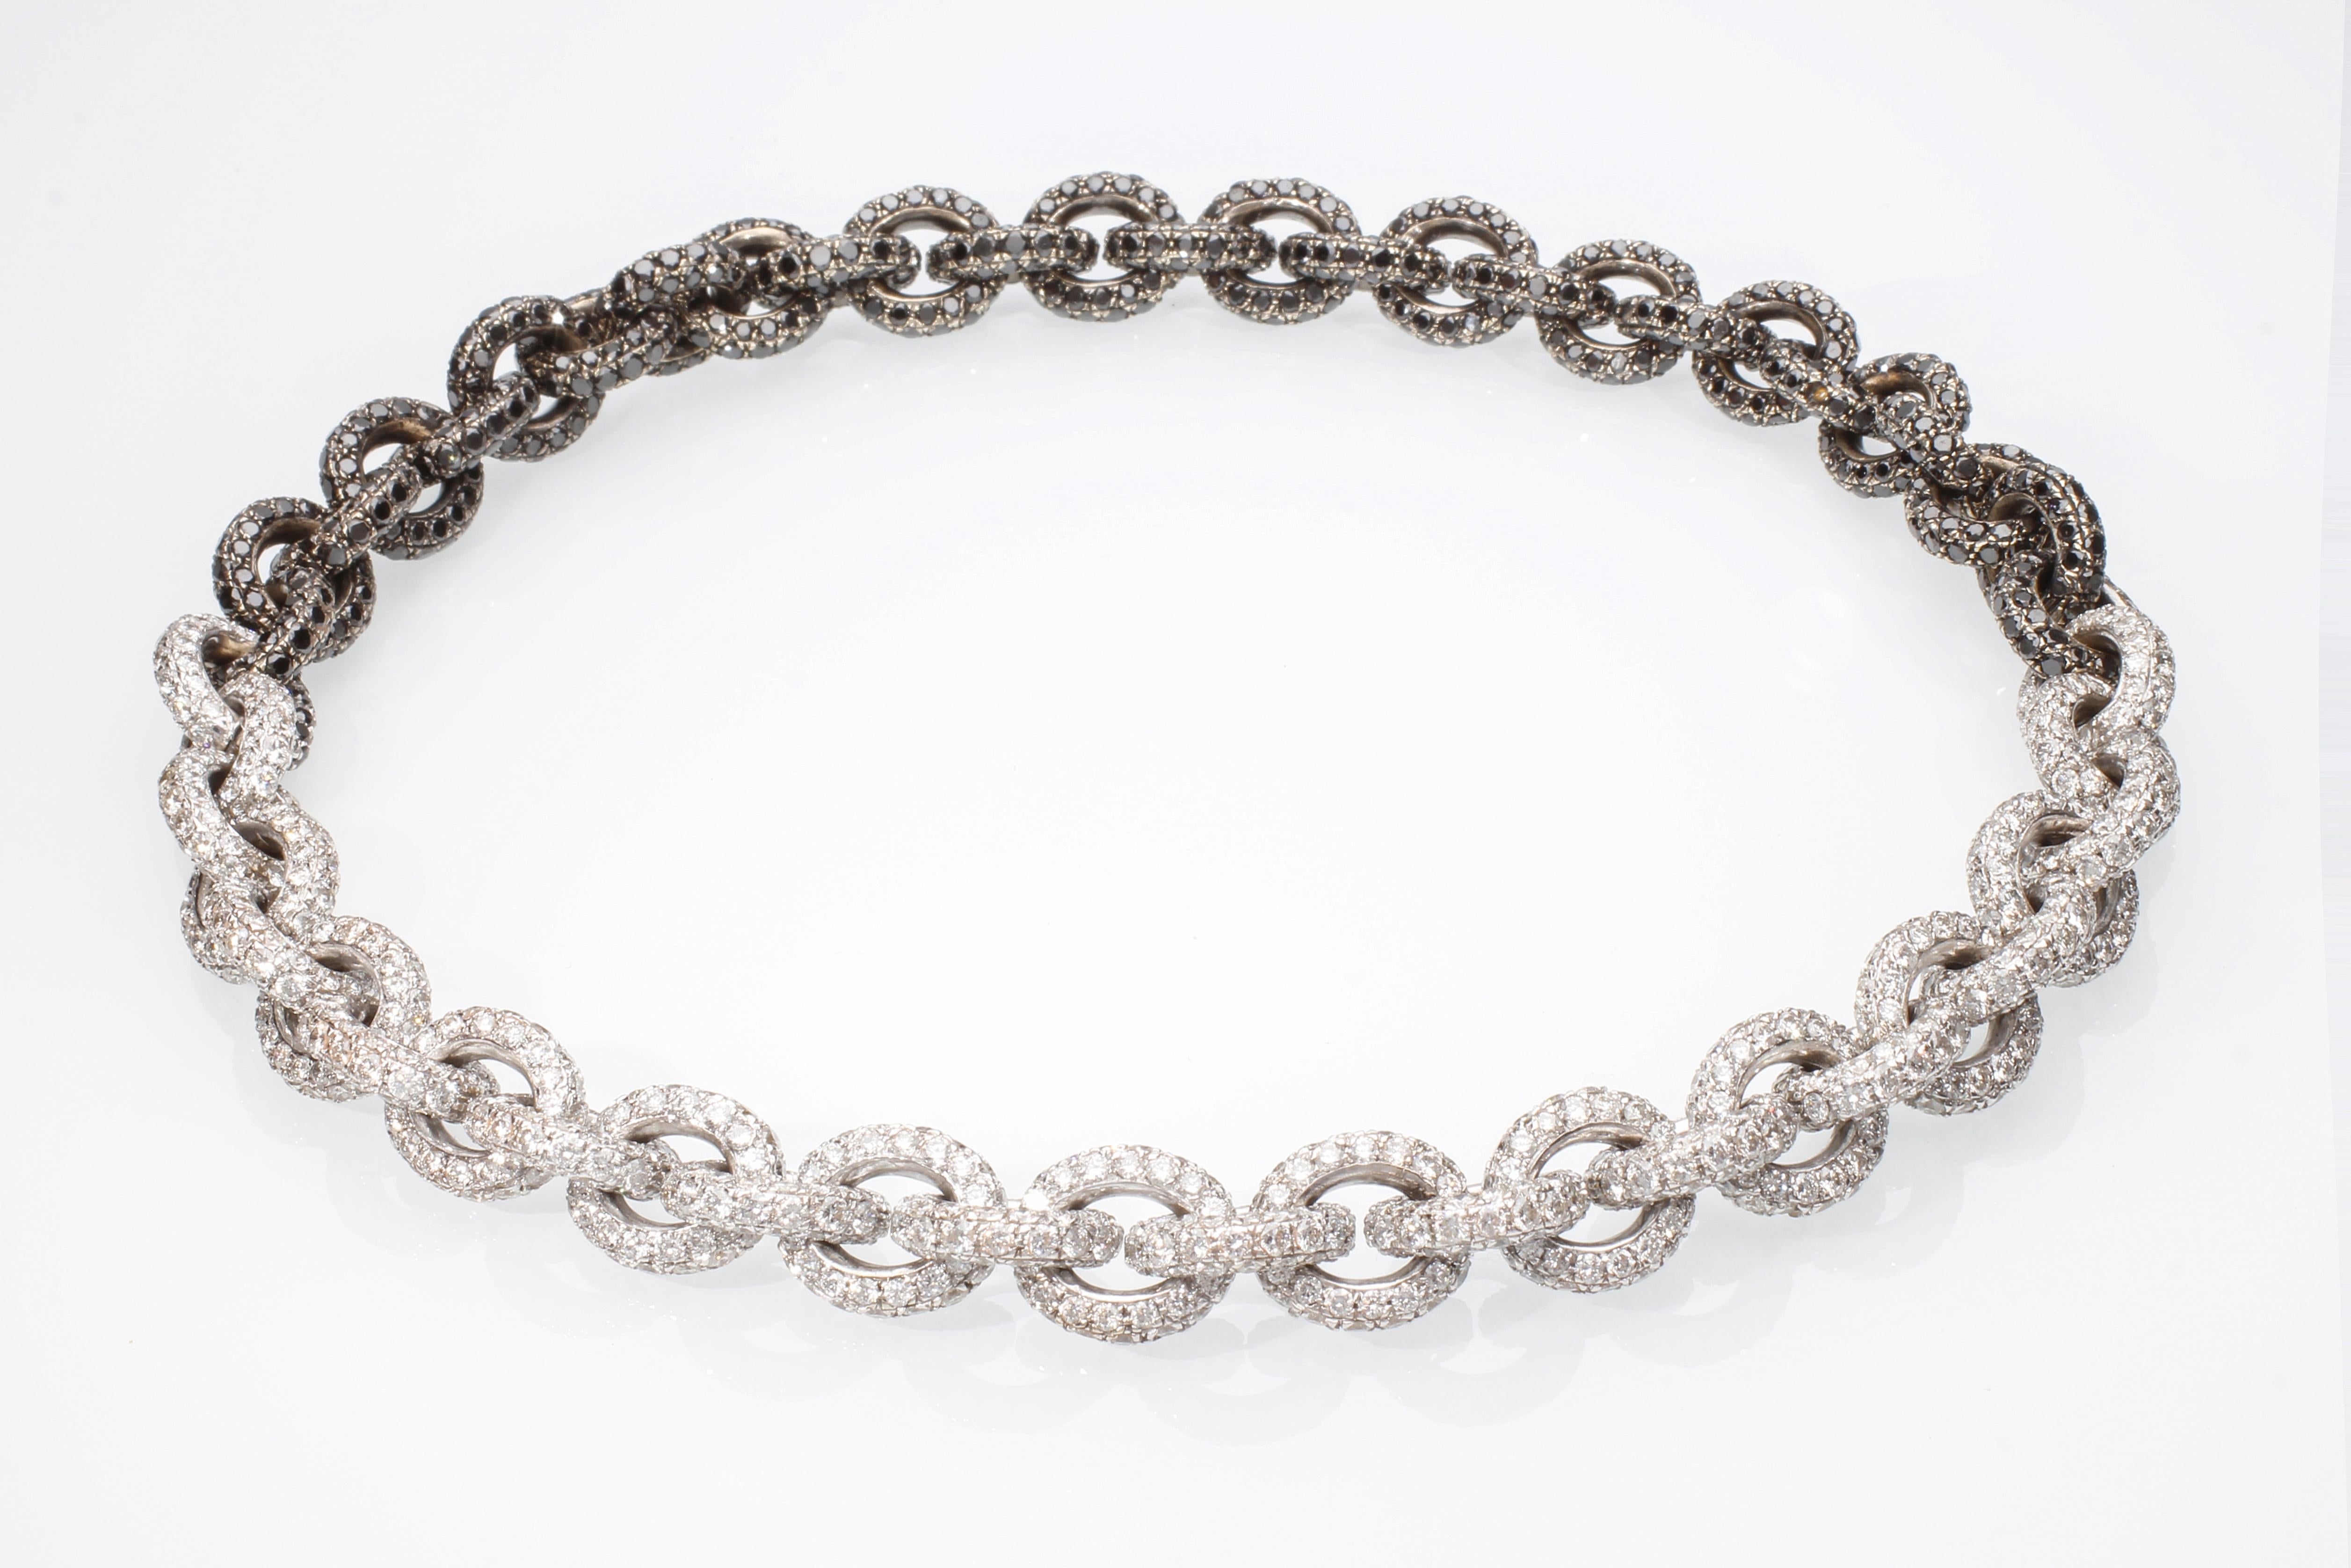 Chain Bracelet with 30.76 Ct of White Diamonds. Handmade. Made in Italy For Sale 6